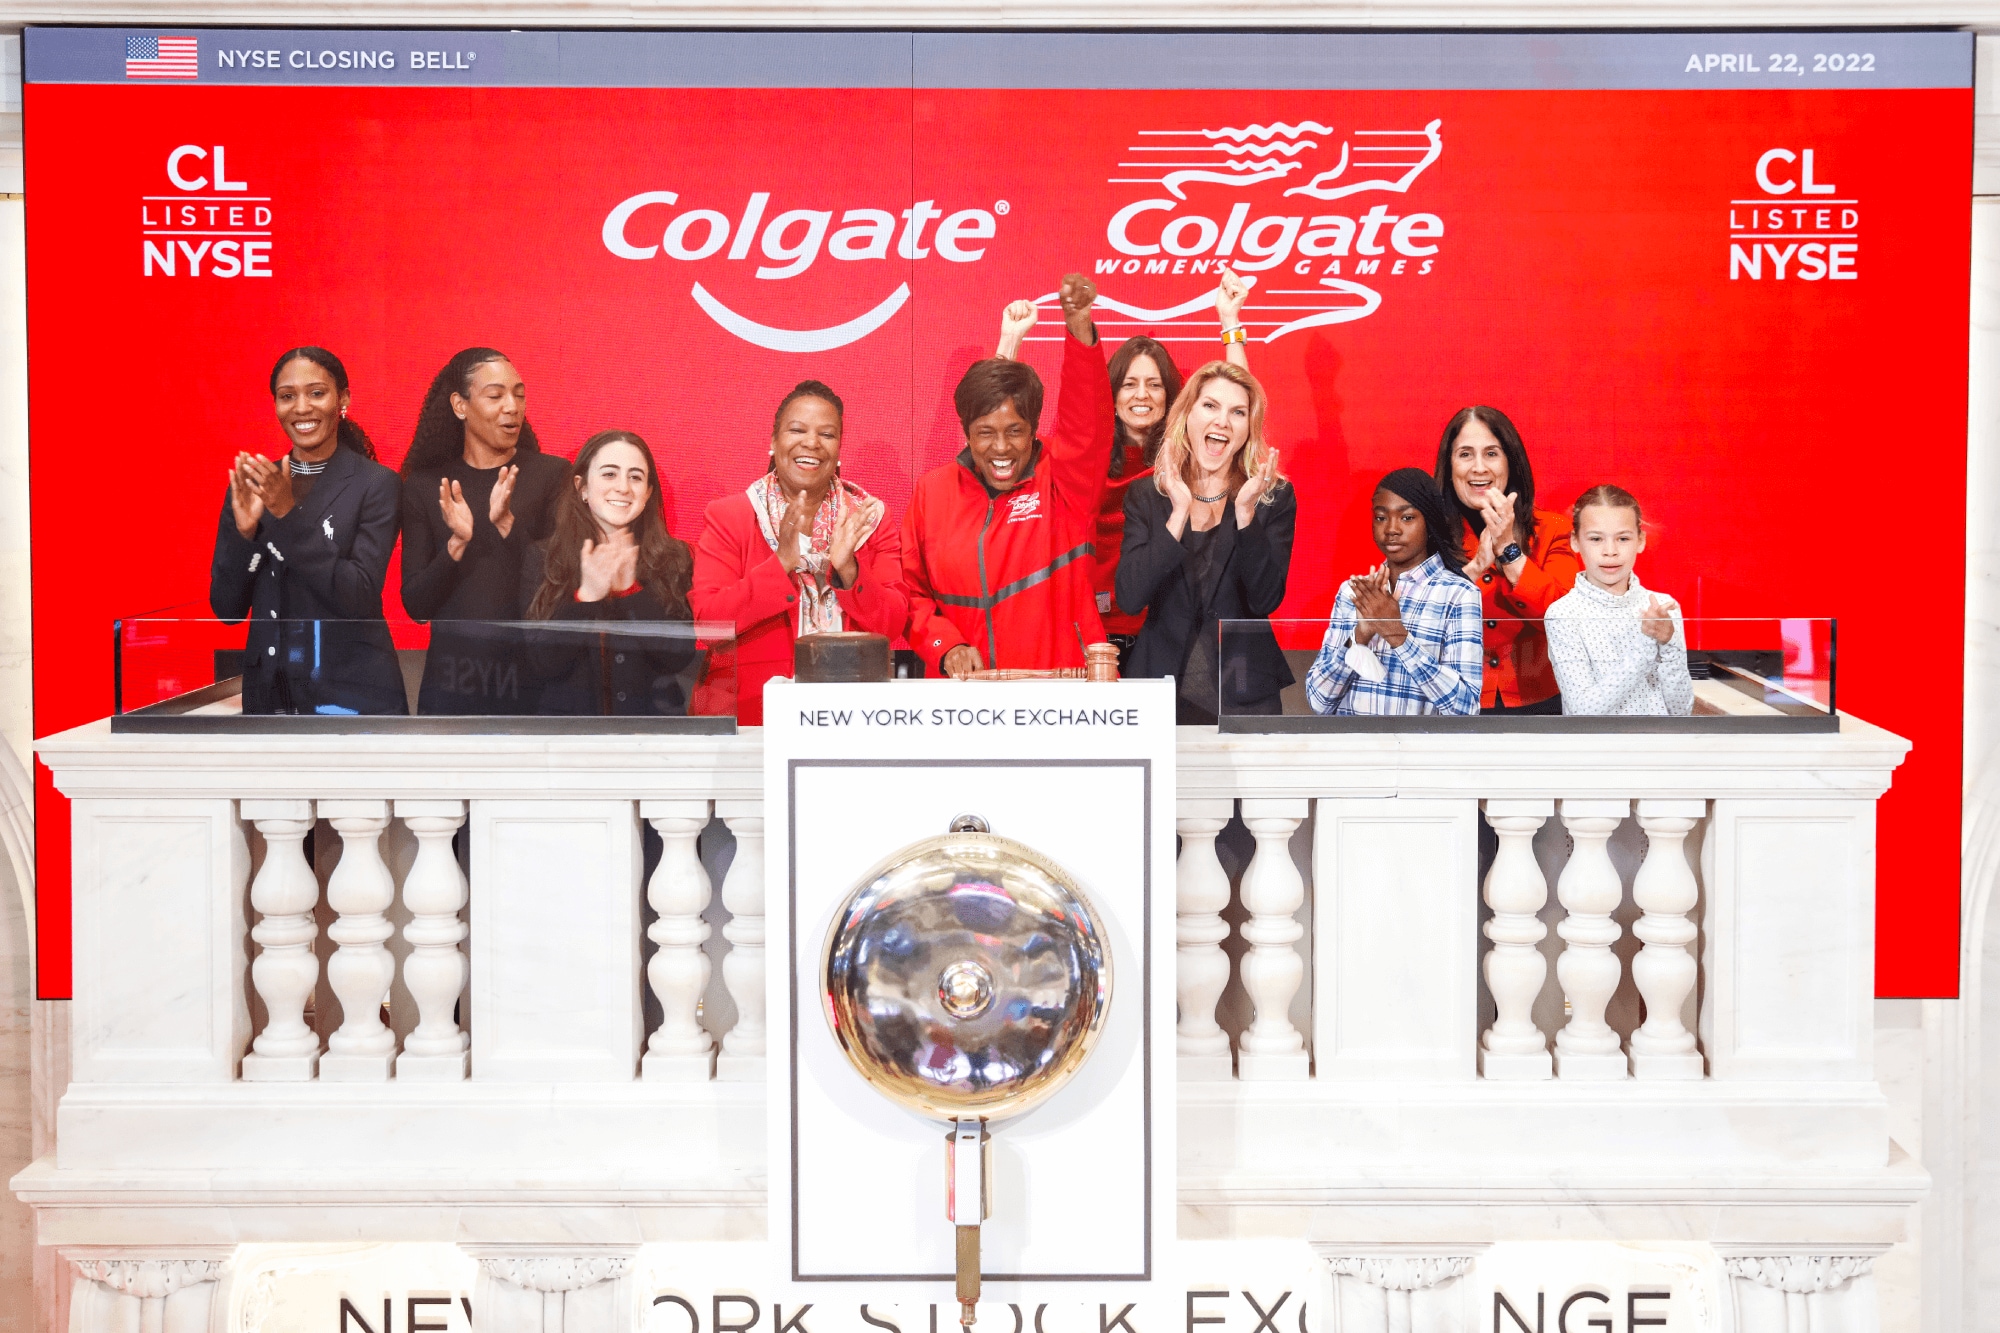 Colgate-Palmolive rings the closing bell at the New York Stock Exchange in honor of the Colgate Women's Games